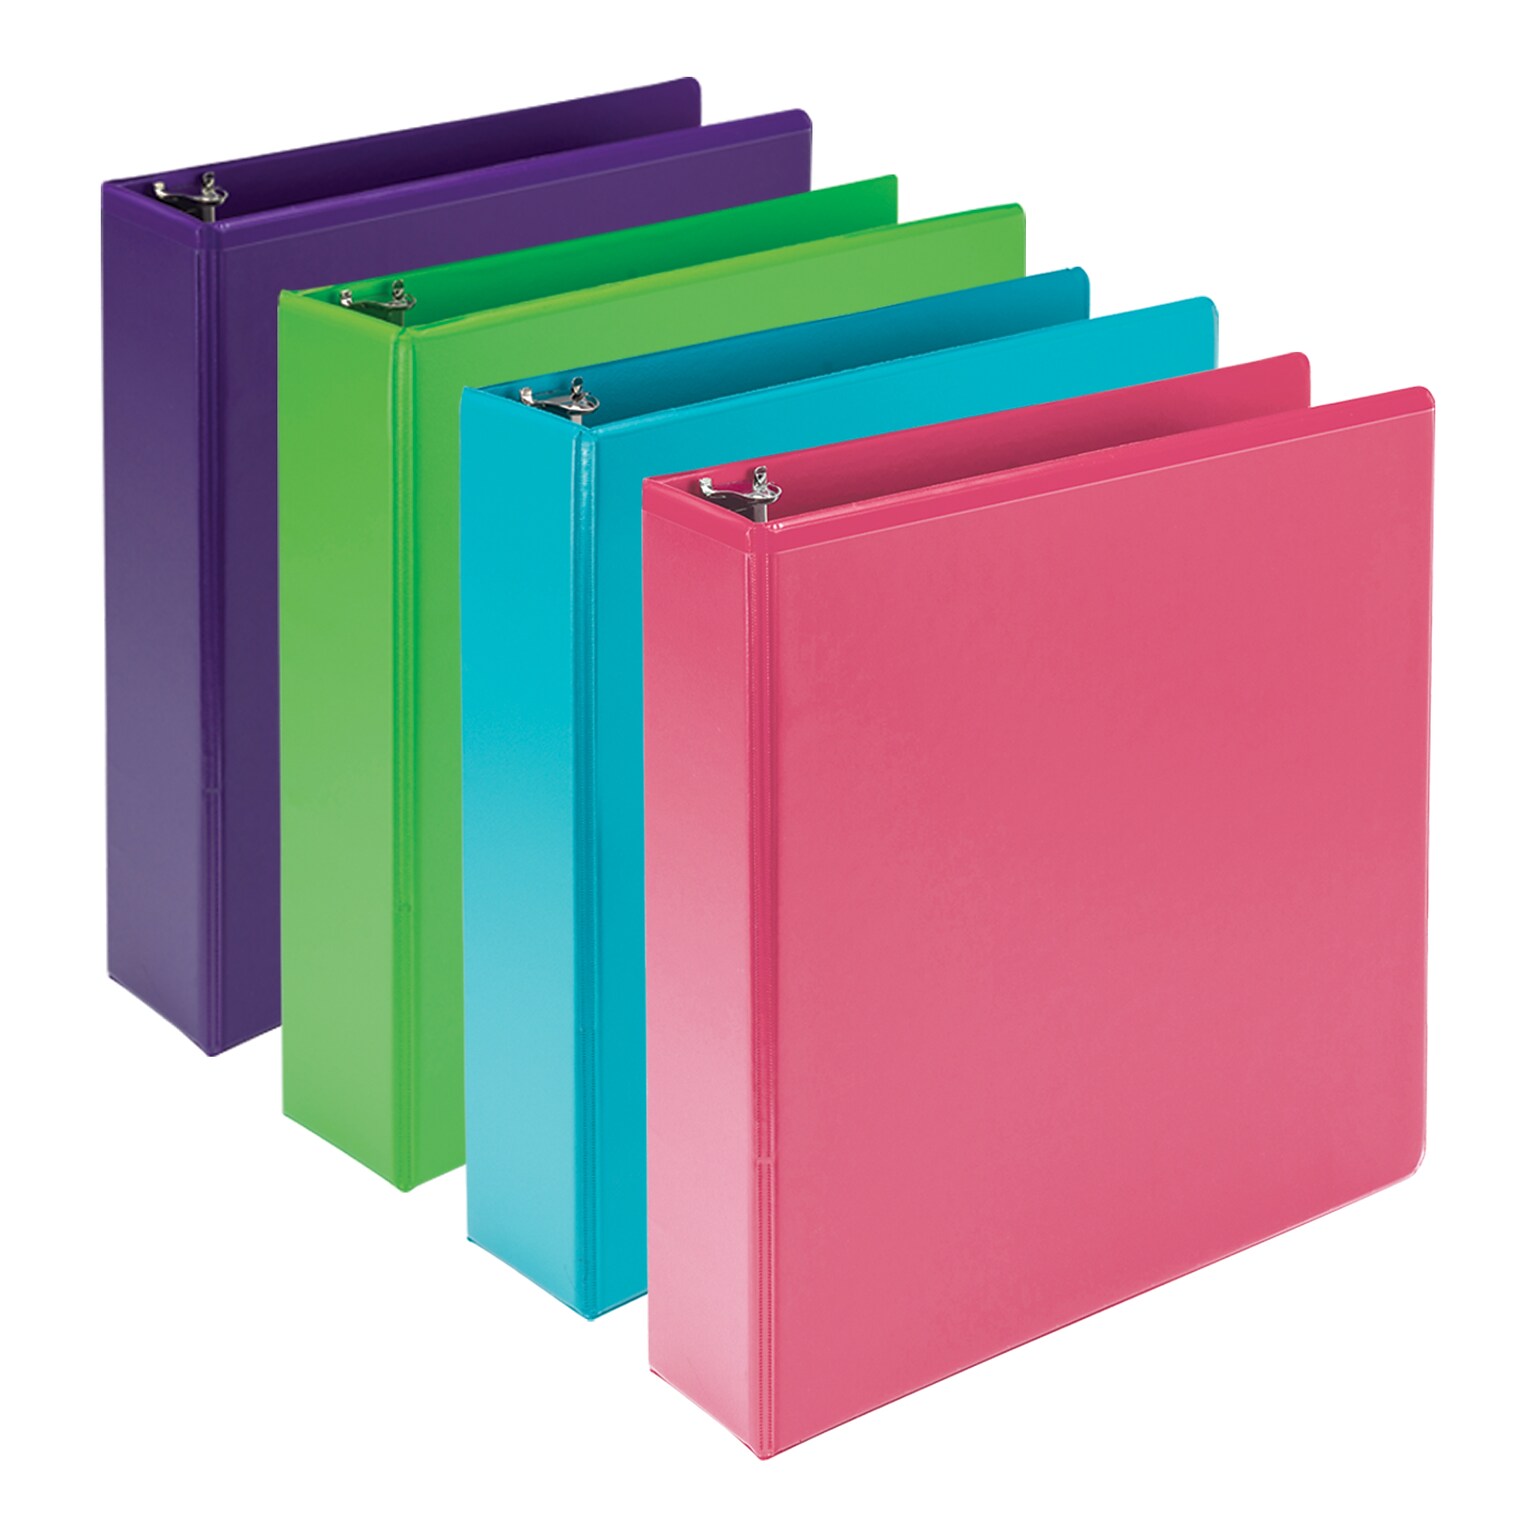 Samsill Earths Choice Plant Based Durable View Binders 3 Round Ring, Lime, Purple, Pink, White, 4 Pack (MP48669)